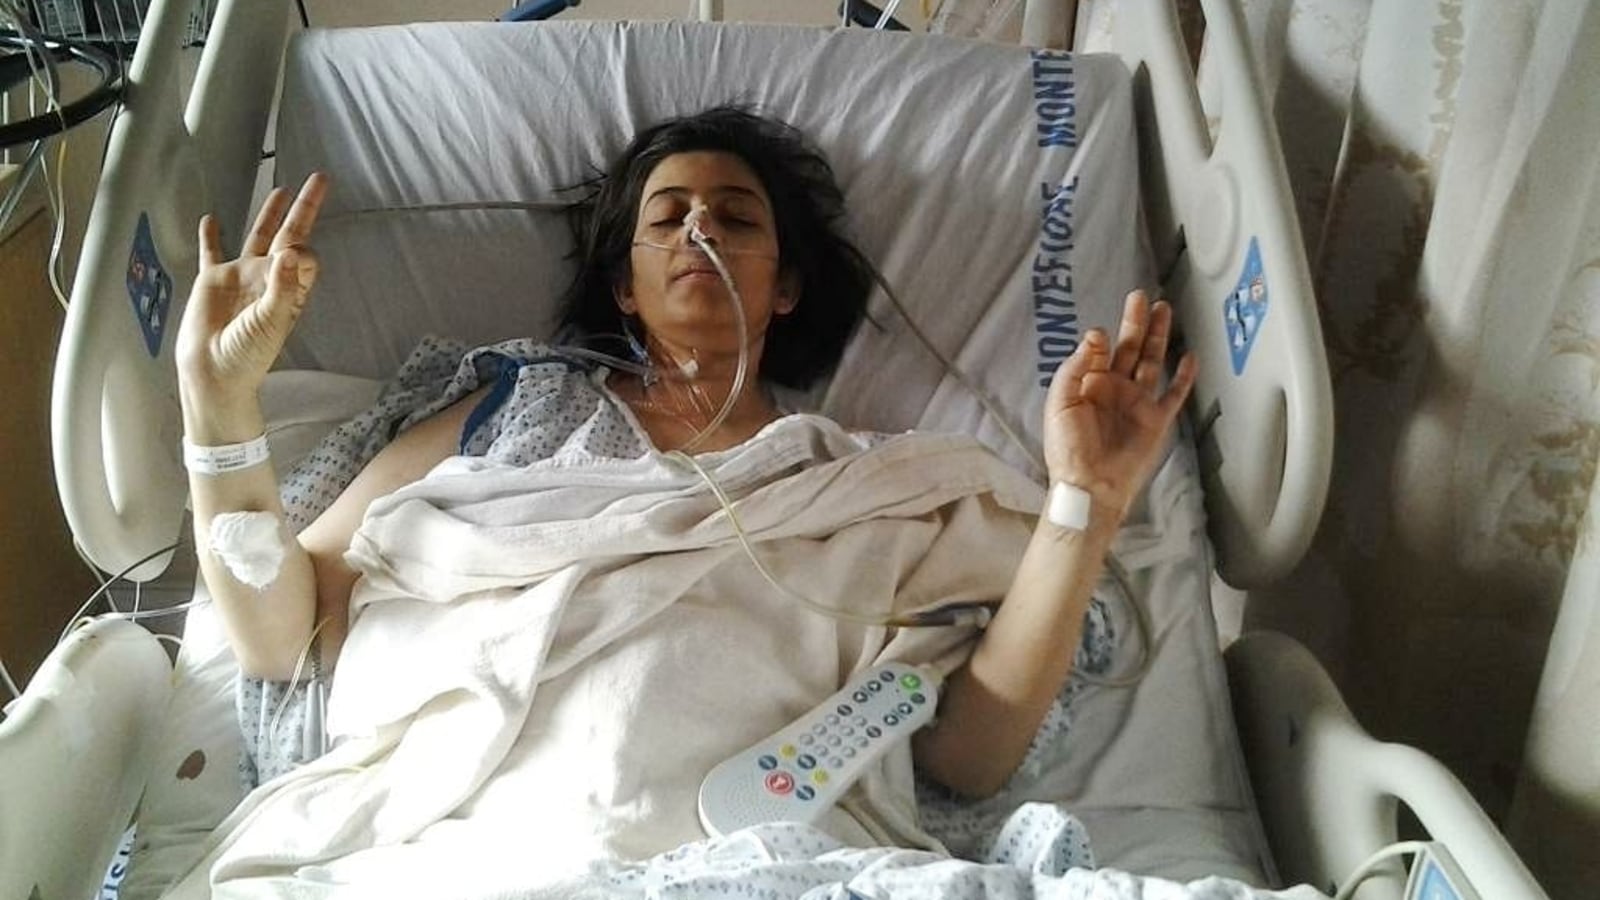 Manisha Koirala writes about the 'arduous' fight with cancer, shares pics  from her treatment | Bollywood - Hindustan Times